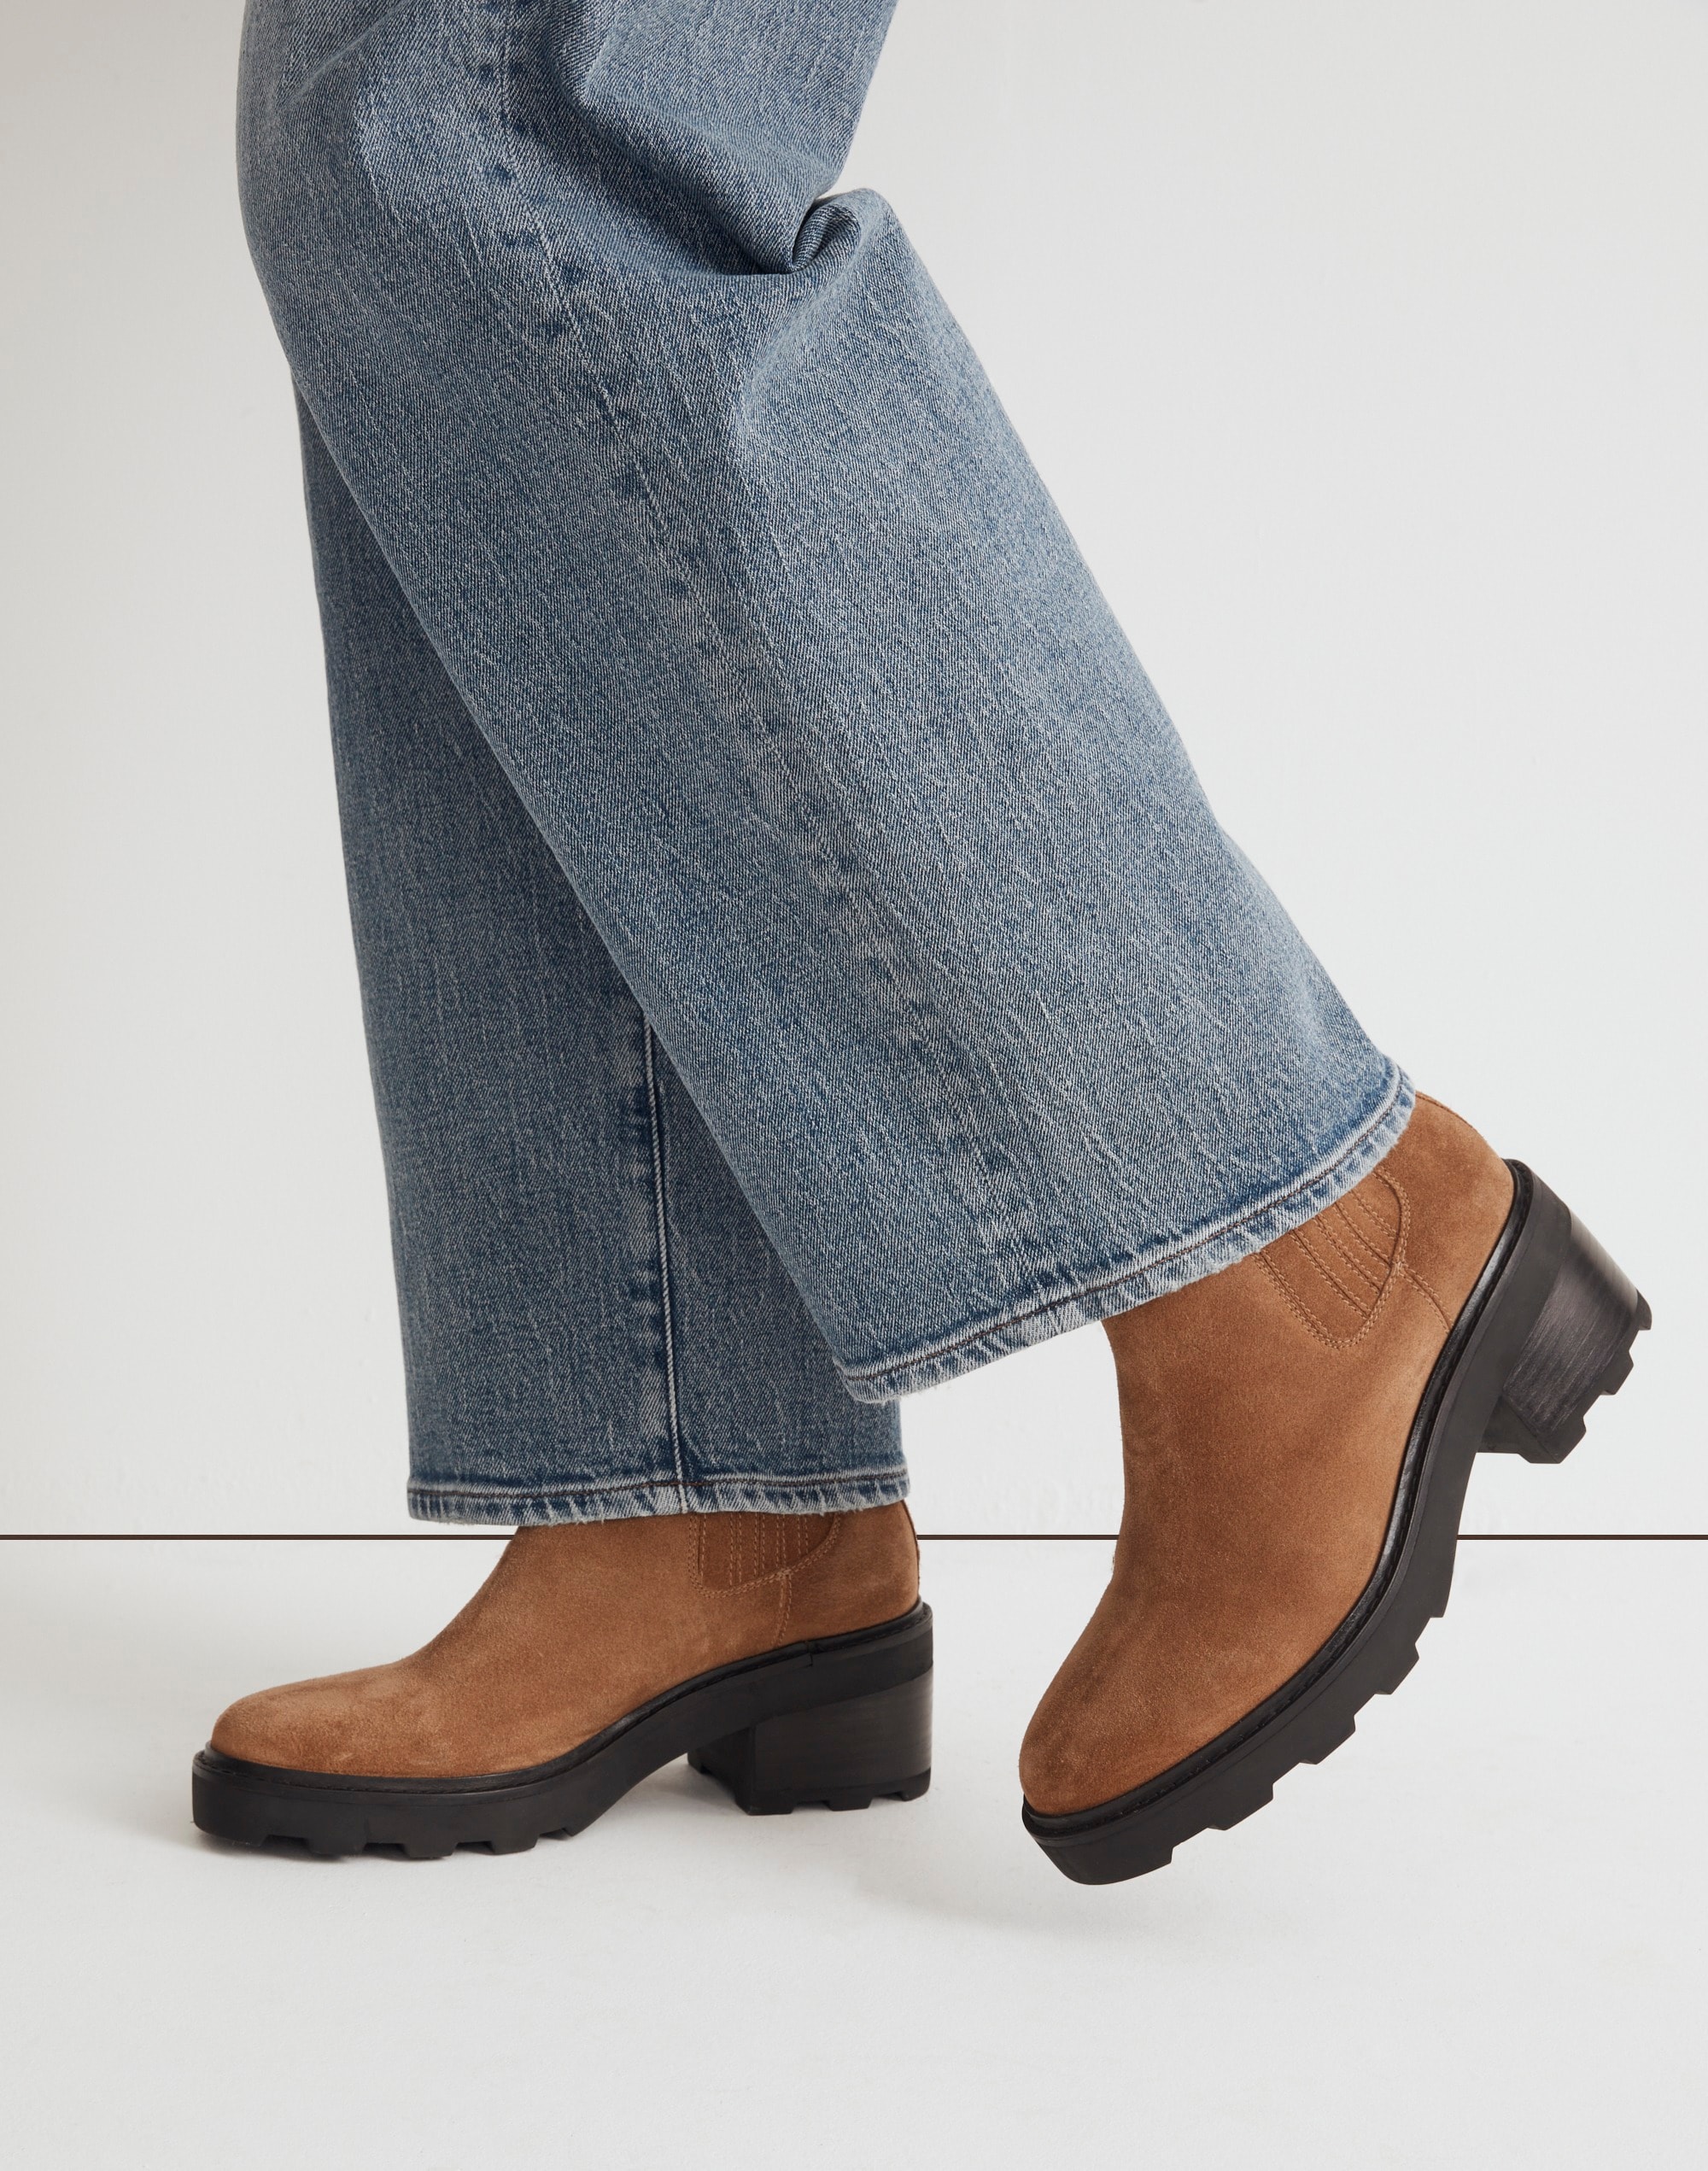 The Gwenda Platform Ankle Boot Suede